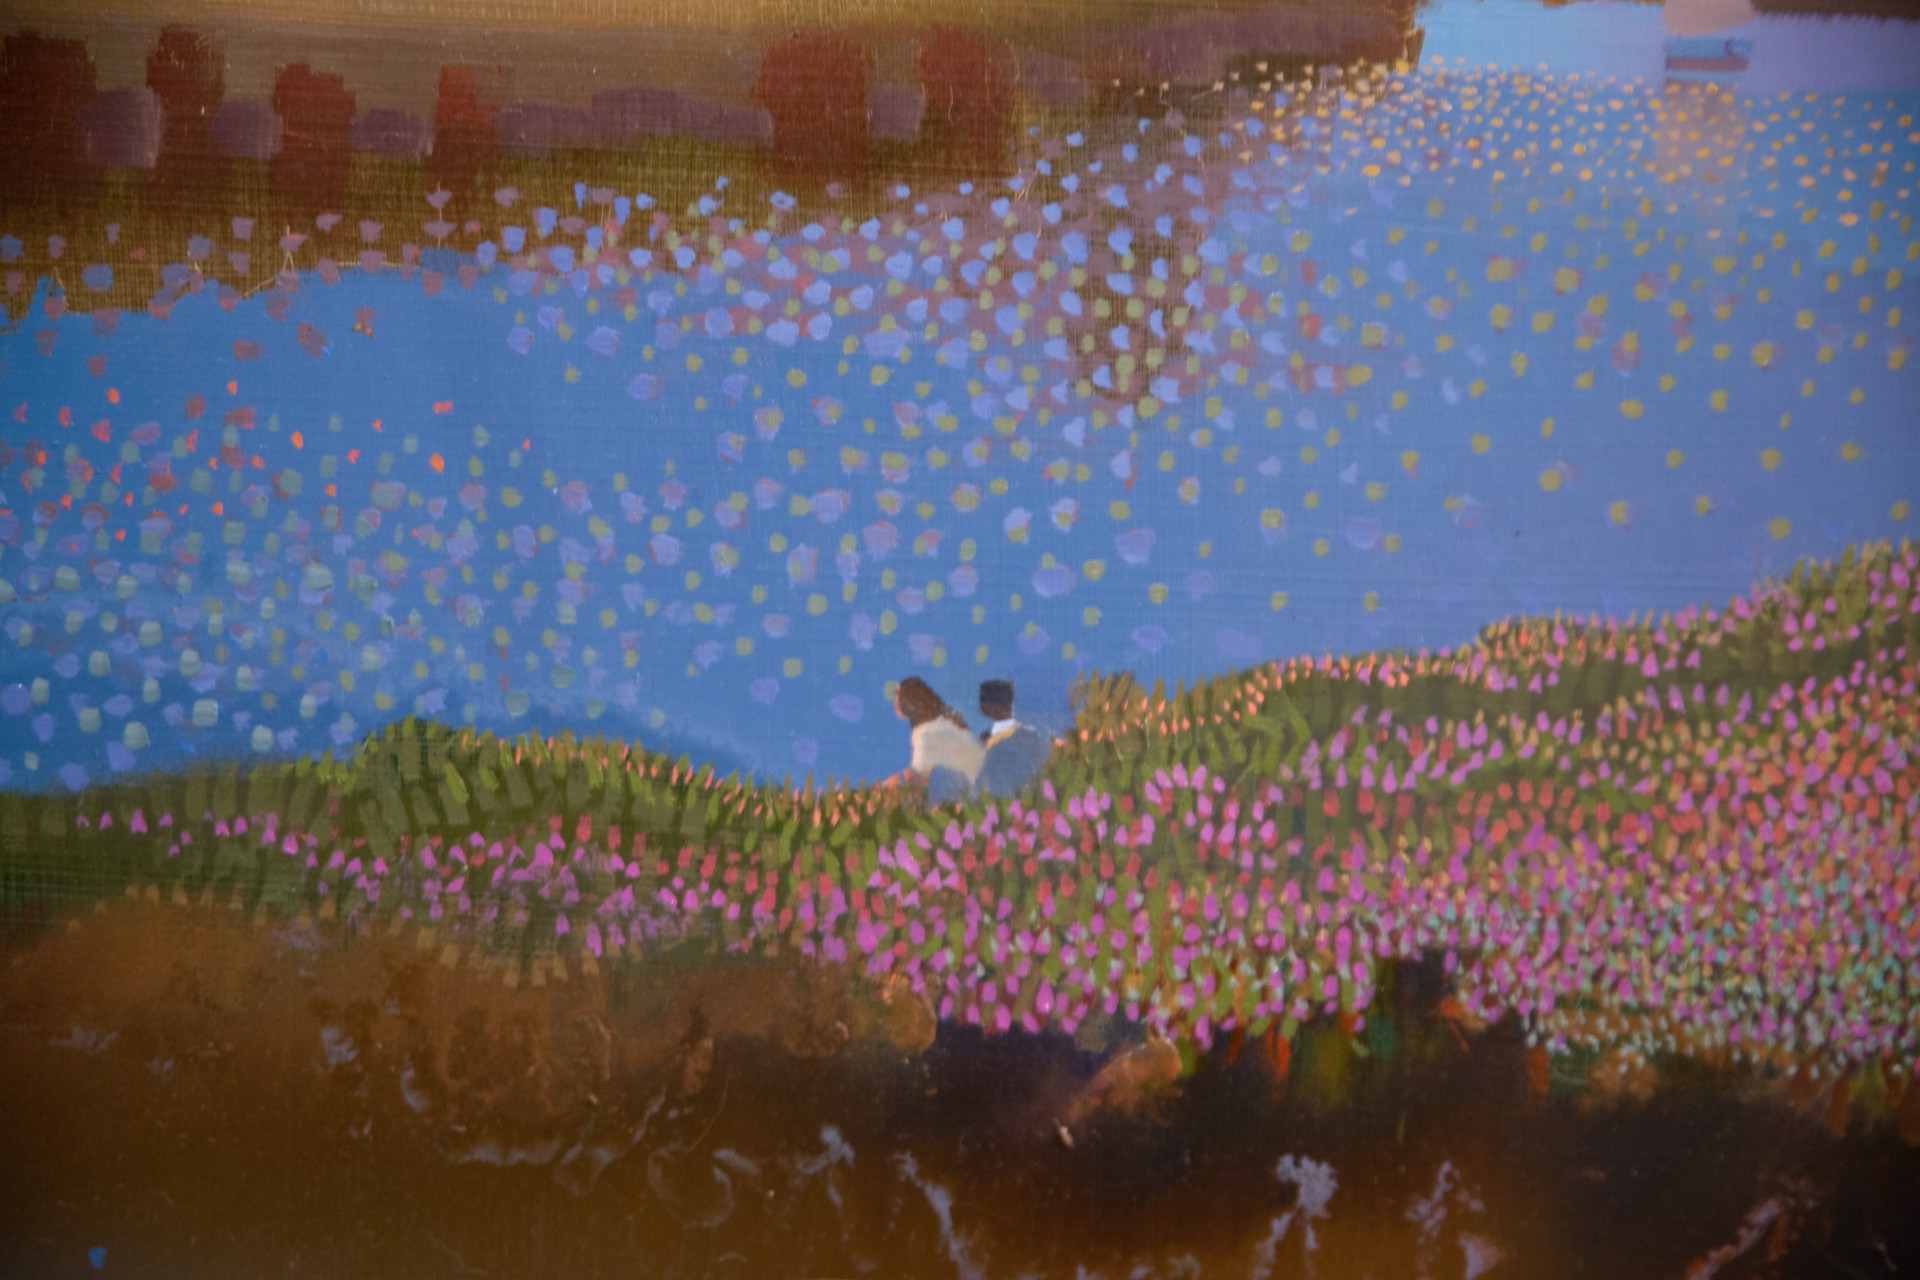 Afternoon Delight by Ton Dubbeldam